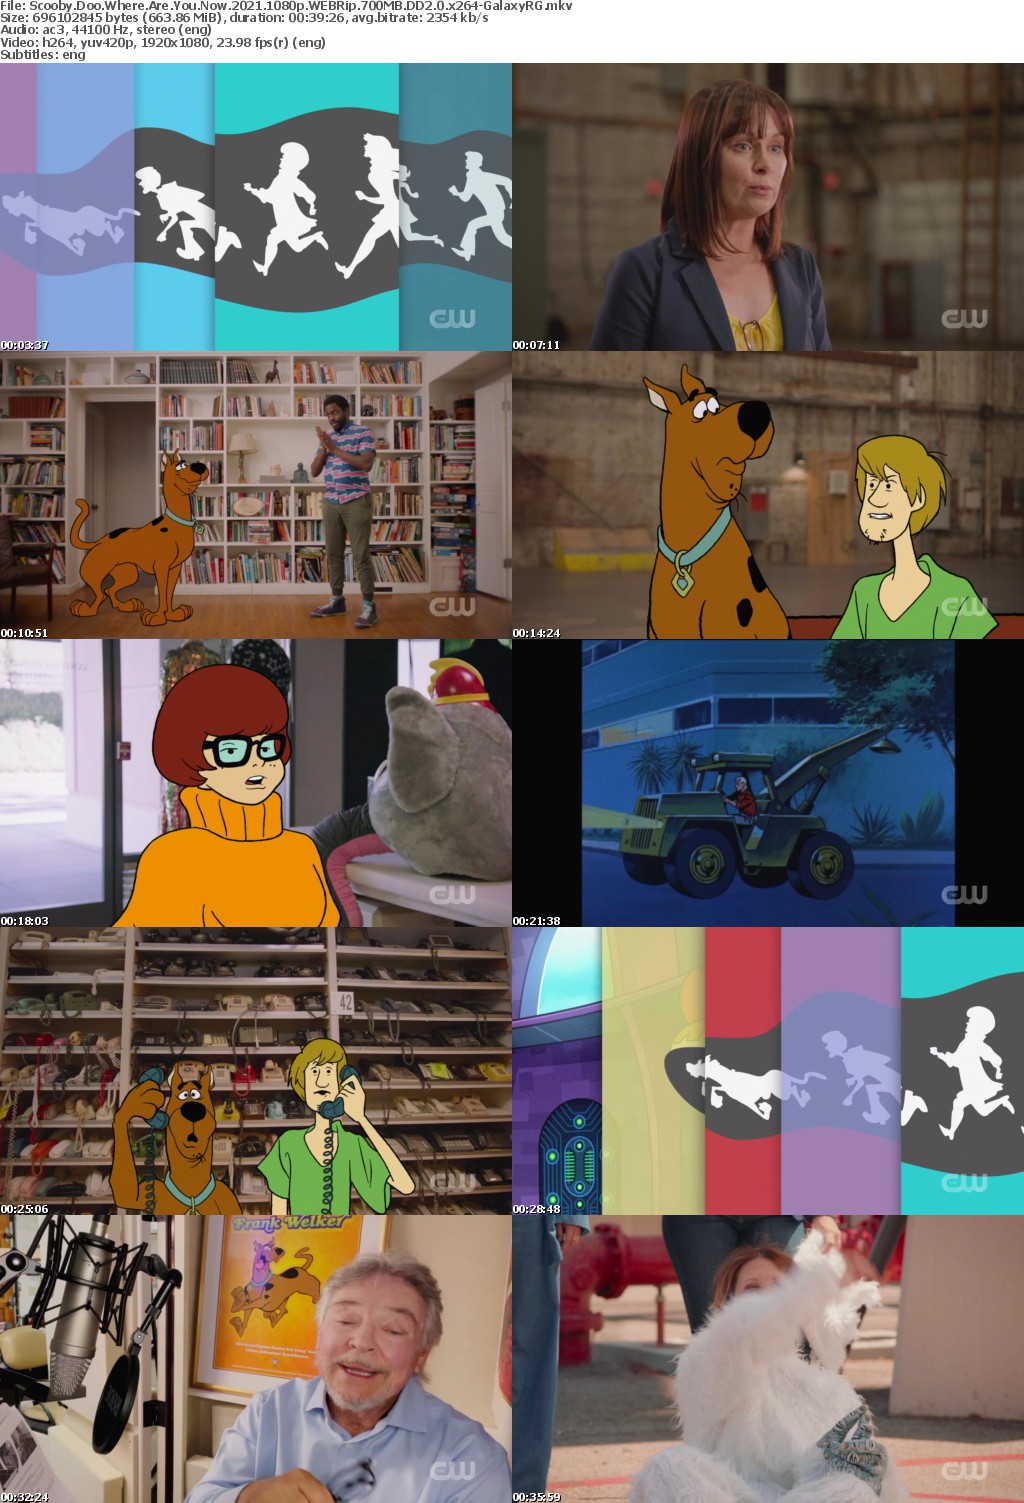 Scooby Doo Where Are You Now 2021 1080p WEBRip 700MB DD2 0 x264-GalaxyRG